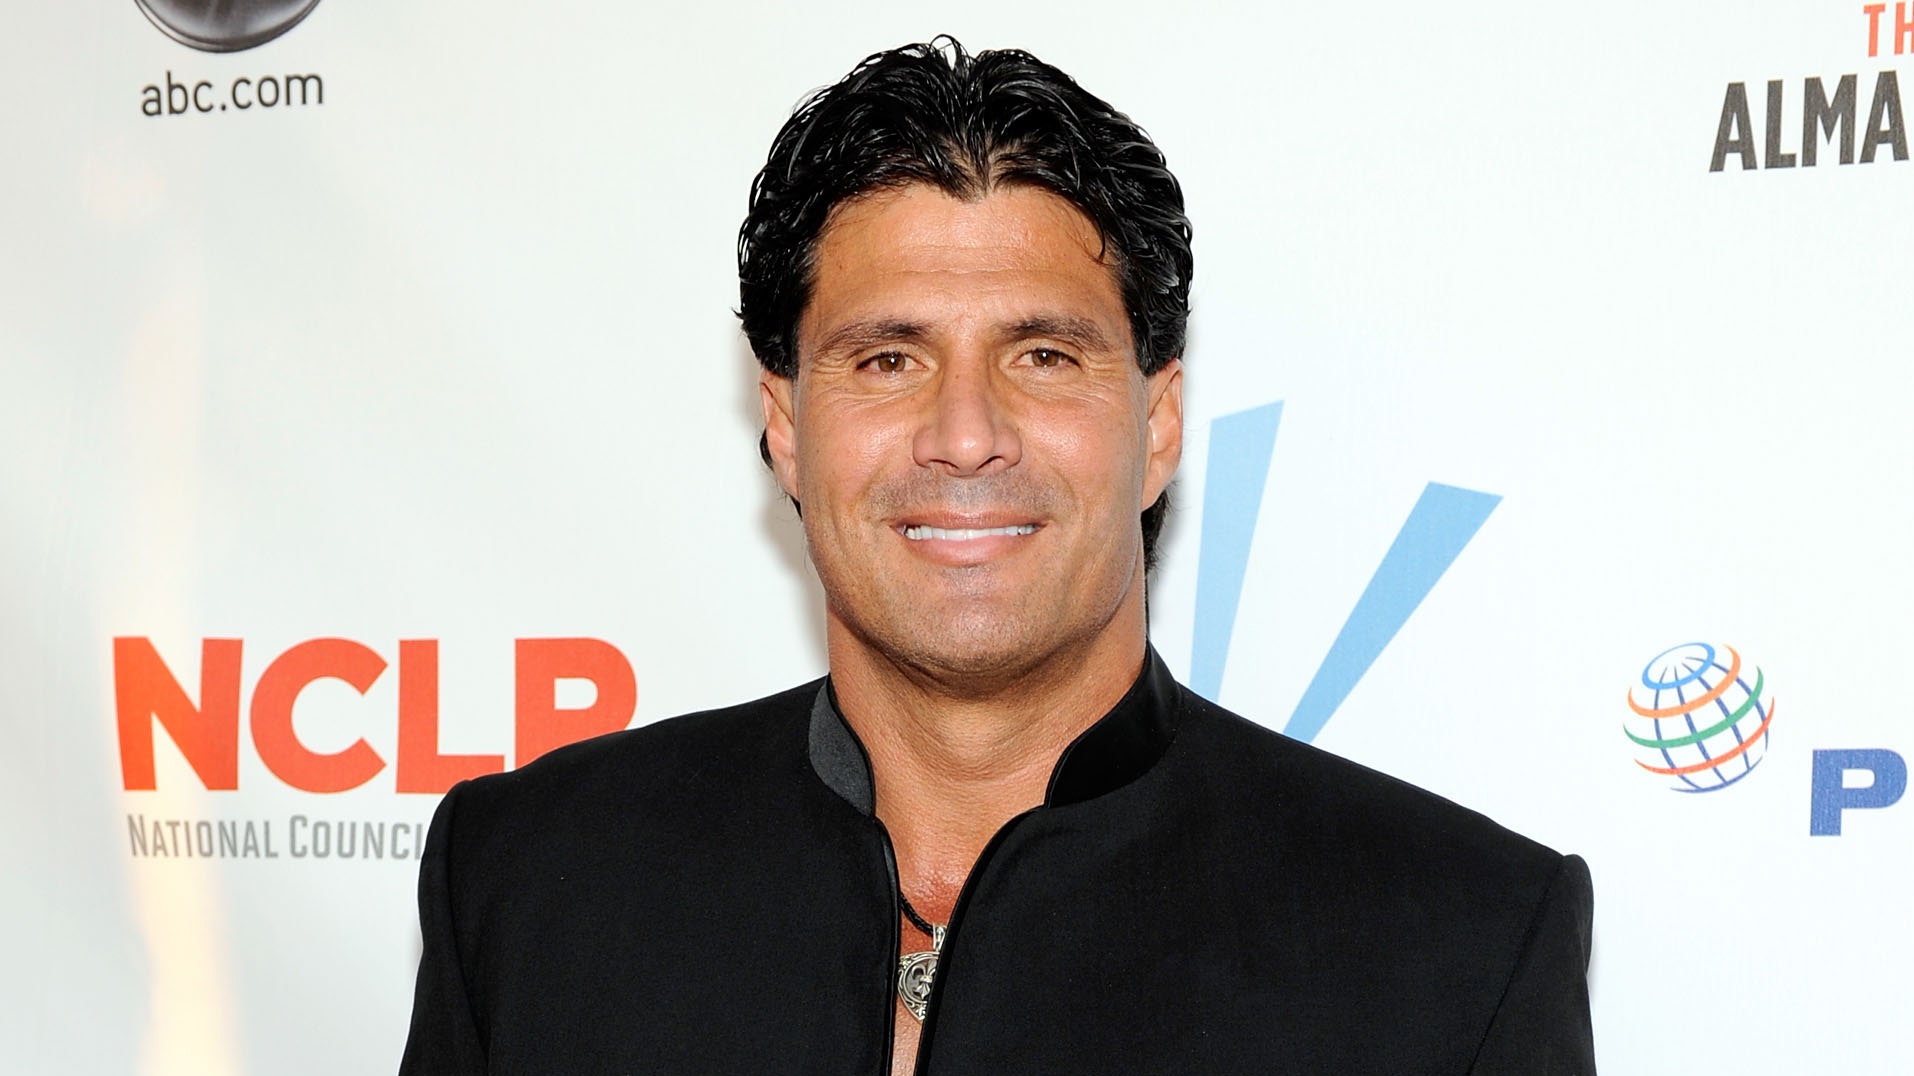 Jose Canseco plans on 'living as a woman' to support Caitlyn Jenner